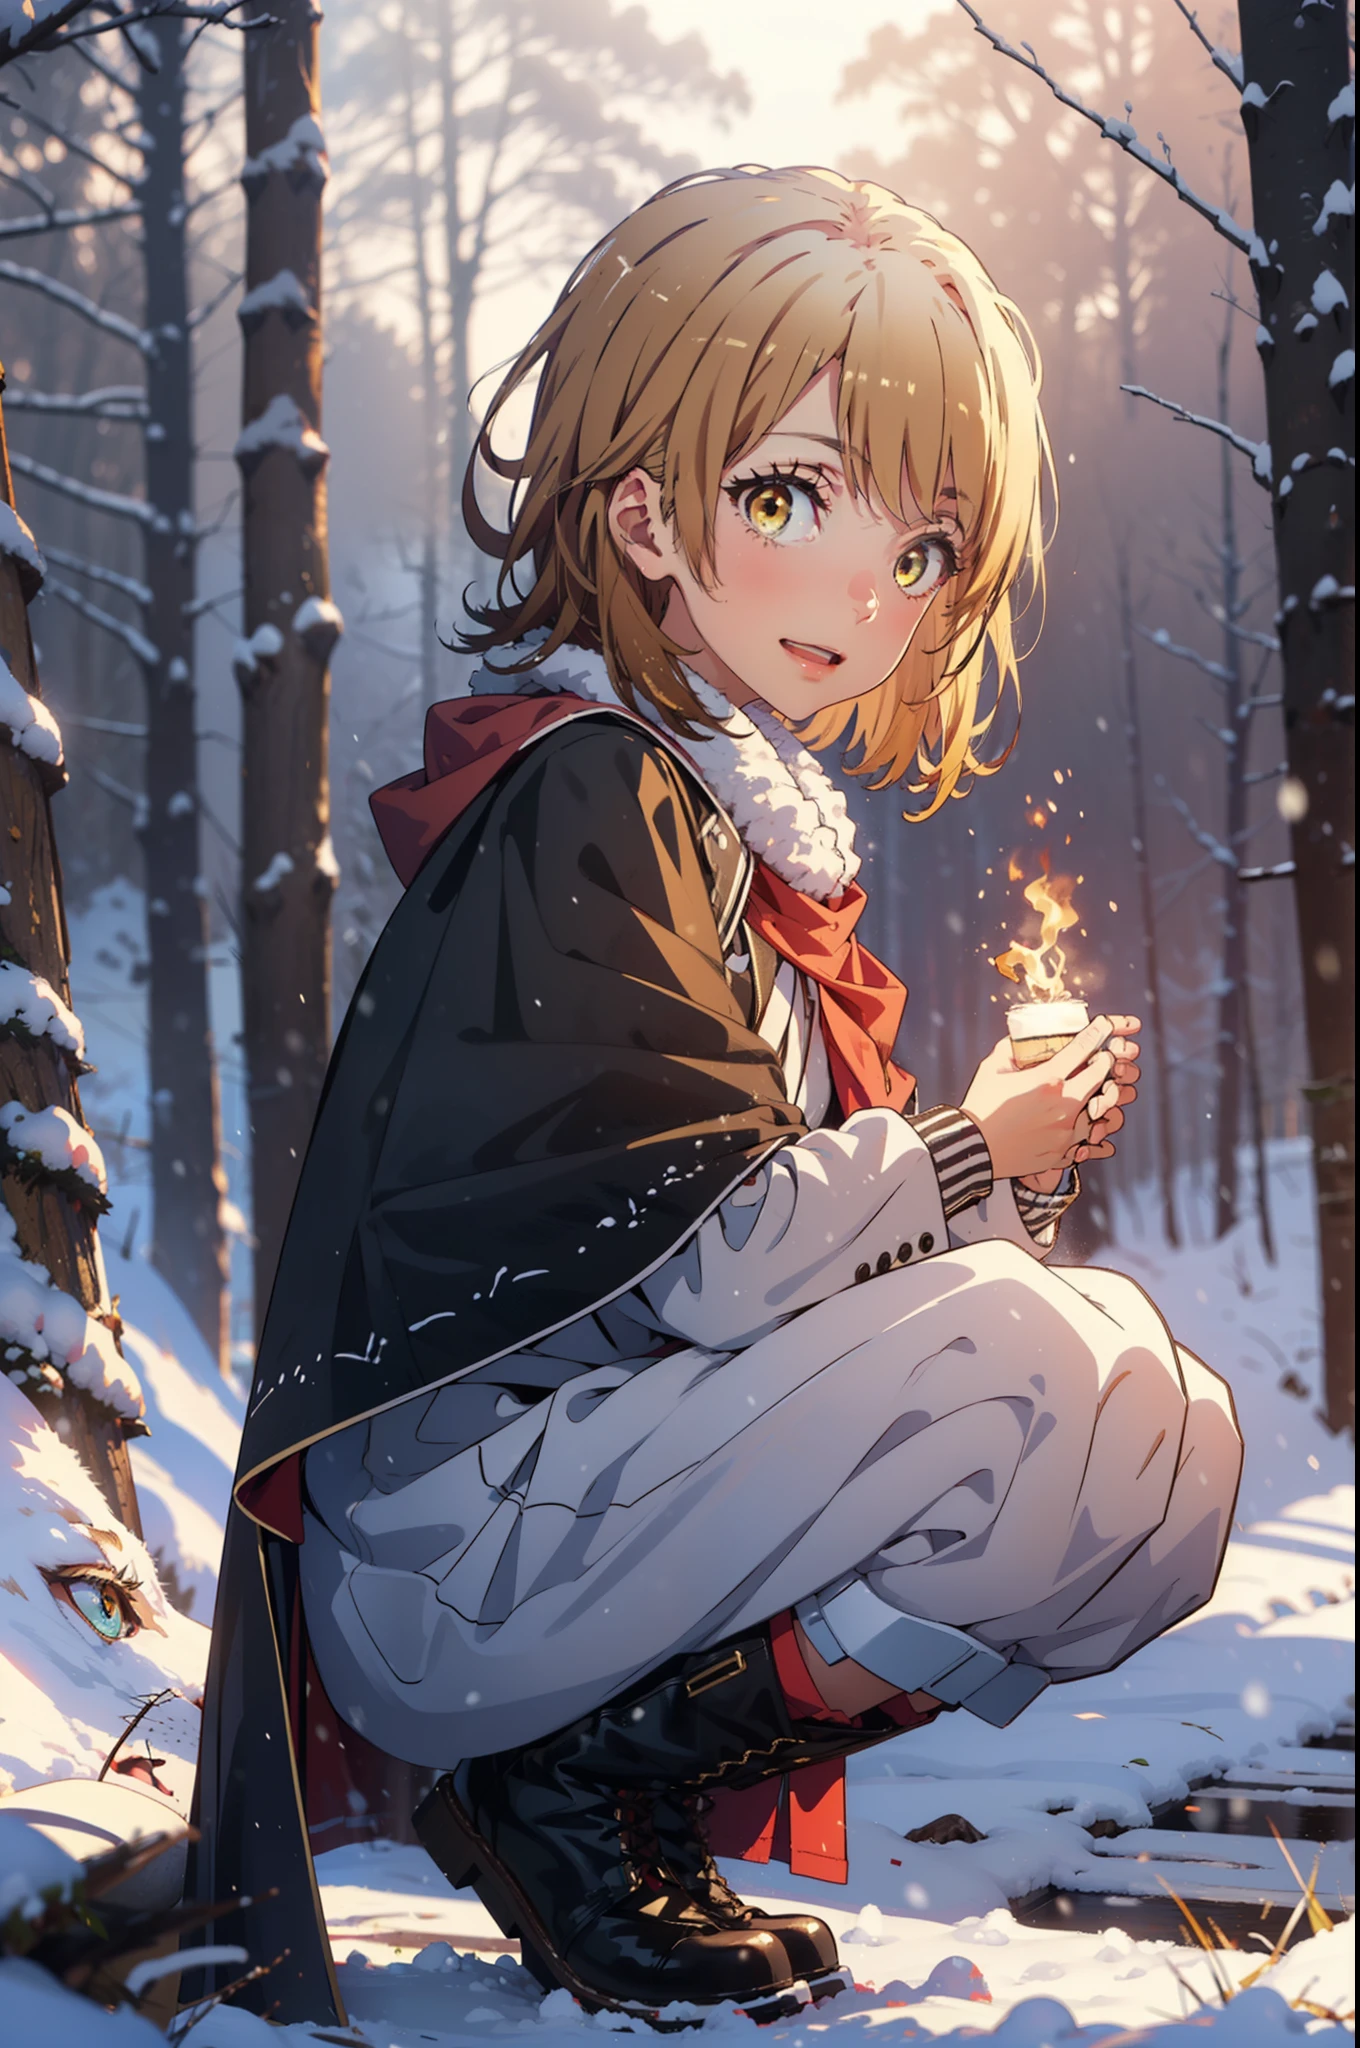 irohaisshiki, iroha isshiki, short hair, brown hair, (Brown eyes:1.5), smile,
Open your mouth,snow, fire, Outdoor, boots, snowing, From the side, wood, suitcase, Cape, Blurred, Food up, forest, White handbags, nature,  Squat, Mouth closed, フードed Cape, winter, Written boundary depth, Black shoes, red Cape break looking at viewer, Upper Body, whole body, break Outdoor, forest, nature, break (masterpiece:1.2), highest quality, High resolution, unity 8k wallpaper, (shape:0.8), (Fine and beautiful eyes:1.6), Highly detailed face, Perfect lighting, Highly detailed CG, (Perfect hands, Perfect Anatomy),